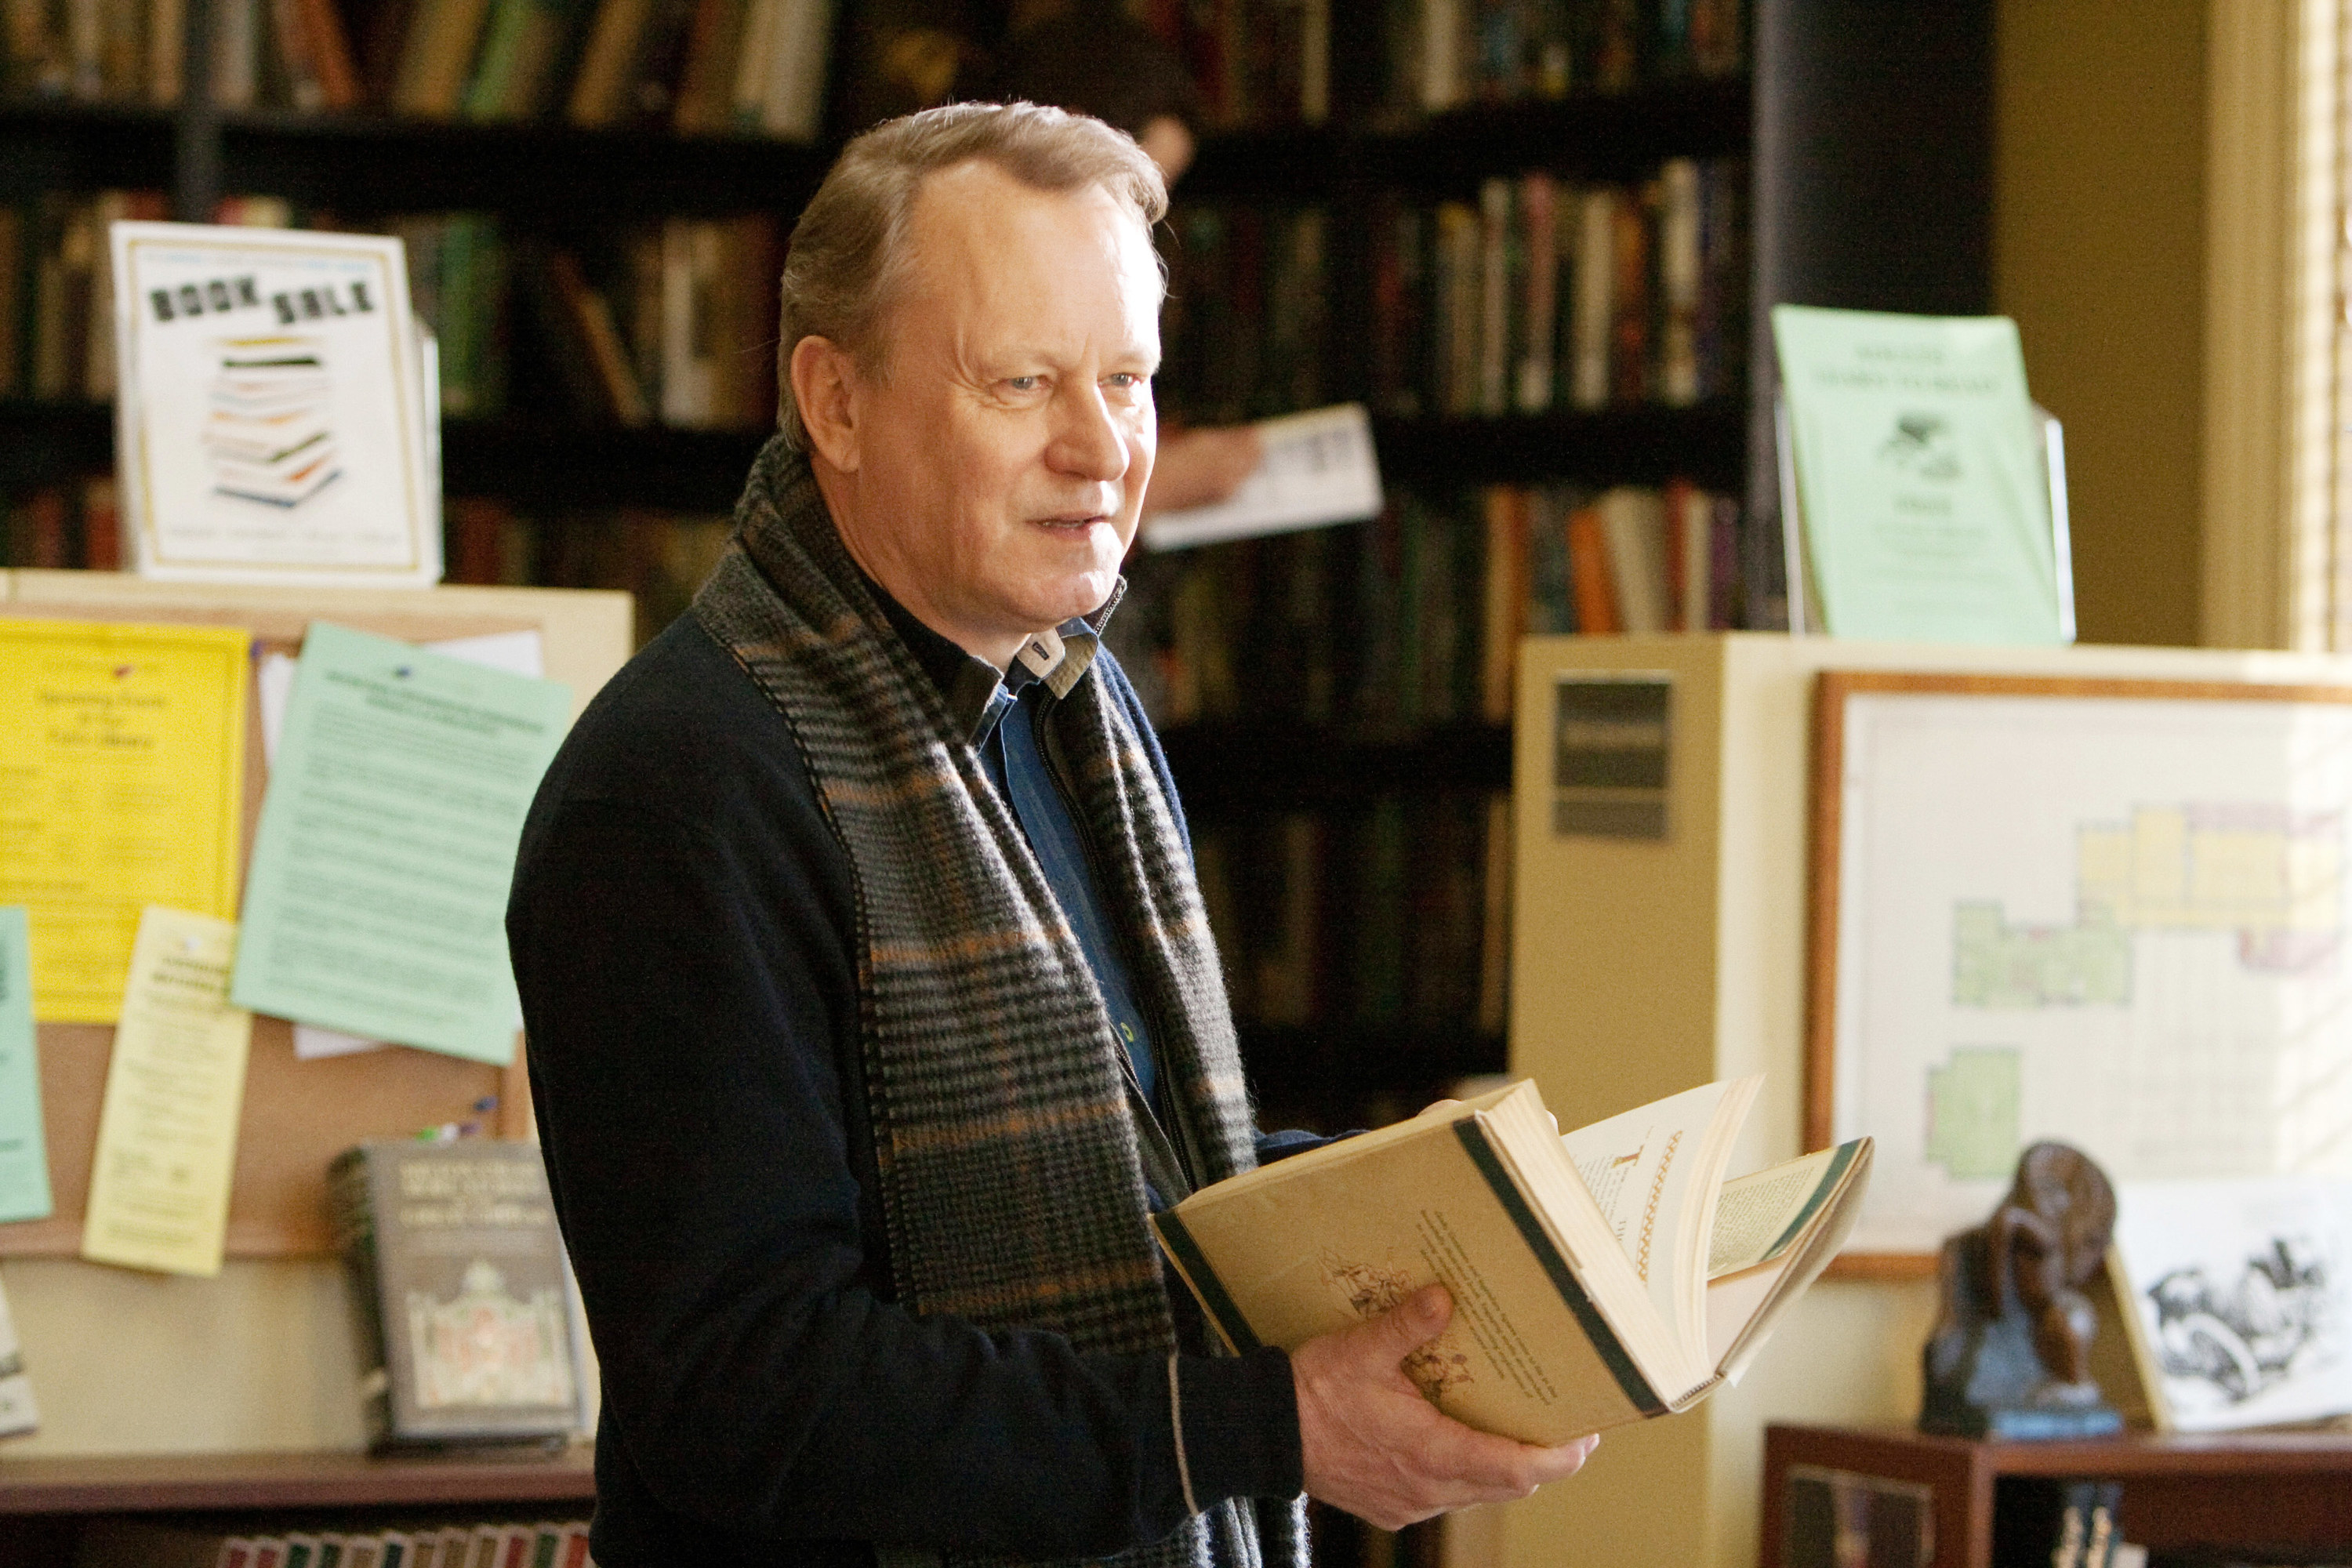 Stellan, wearing a scar, stands holding a book and with bookshelves behind him